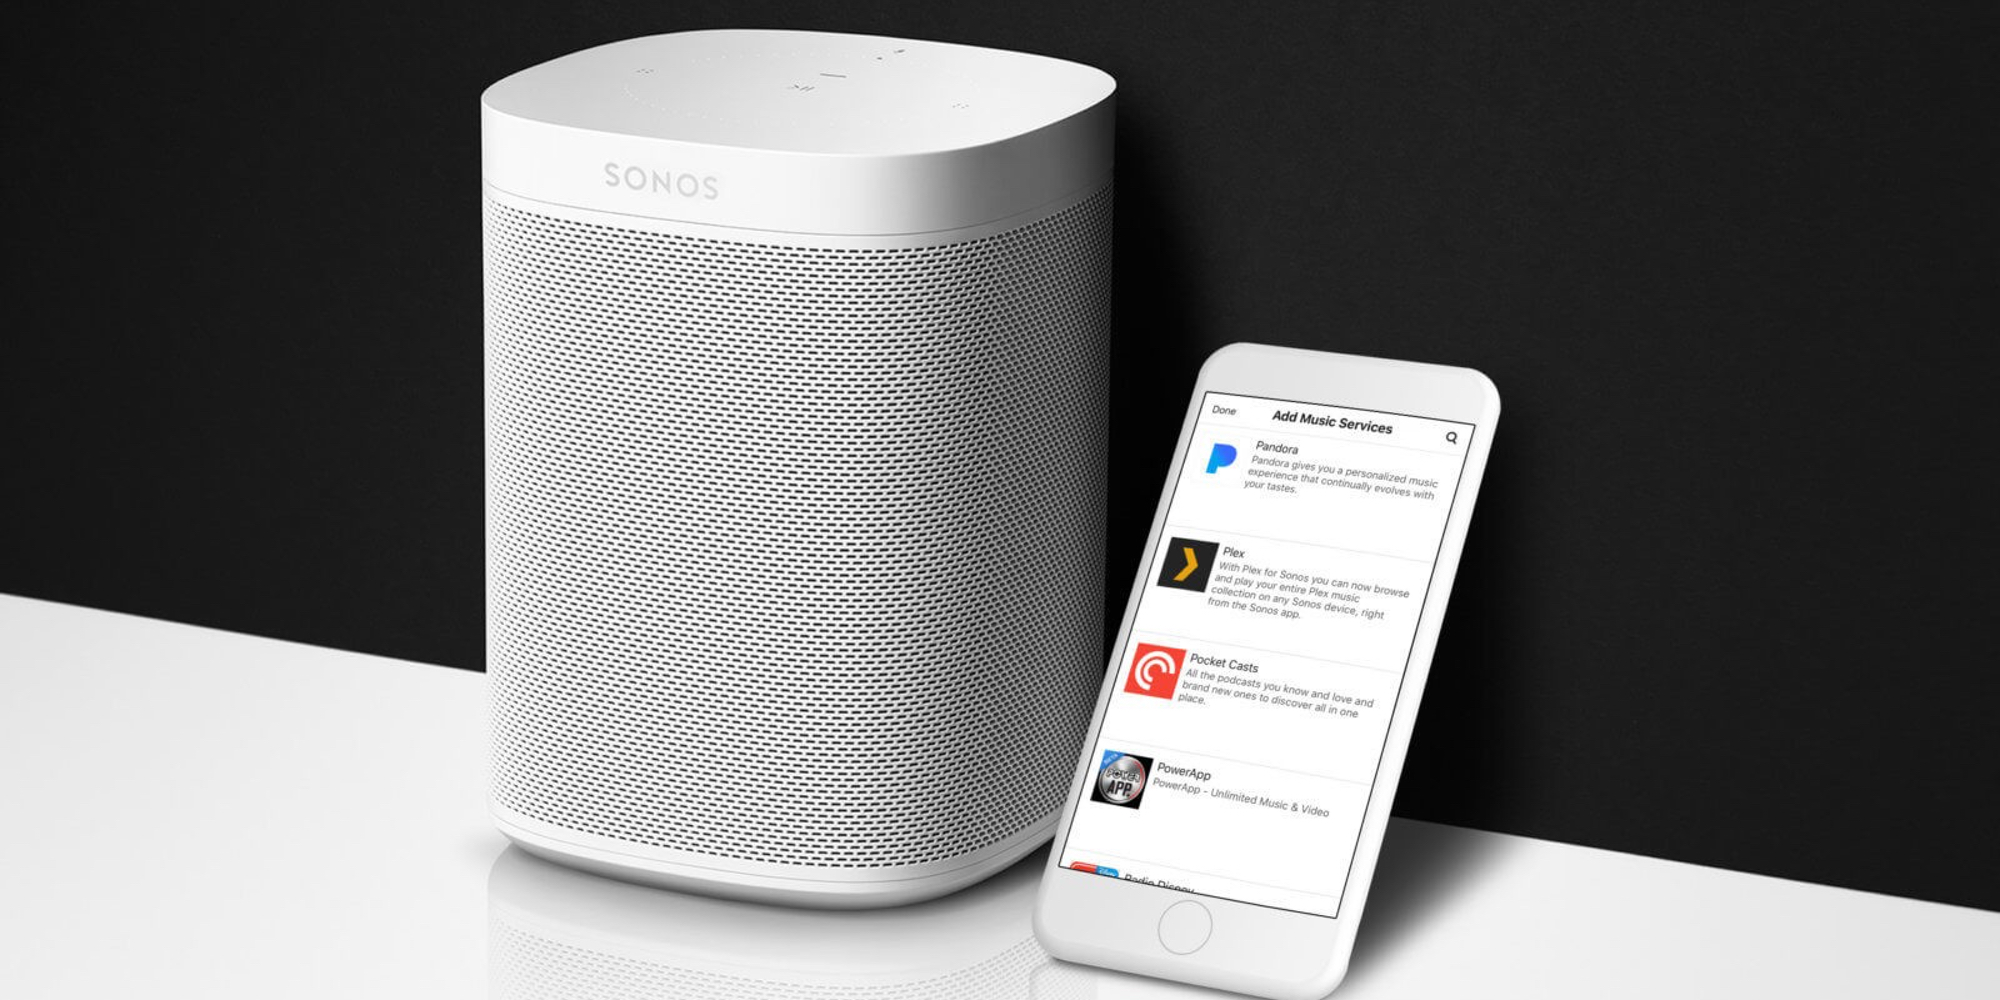 Plex brings Sonos Alexa support among other enhancements to your music library